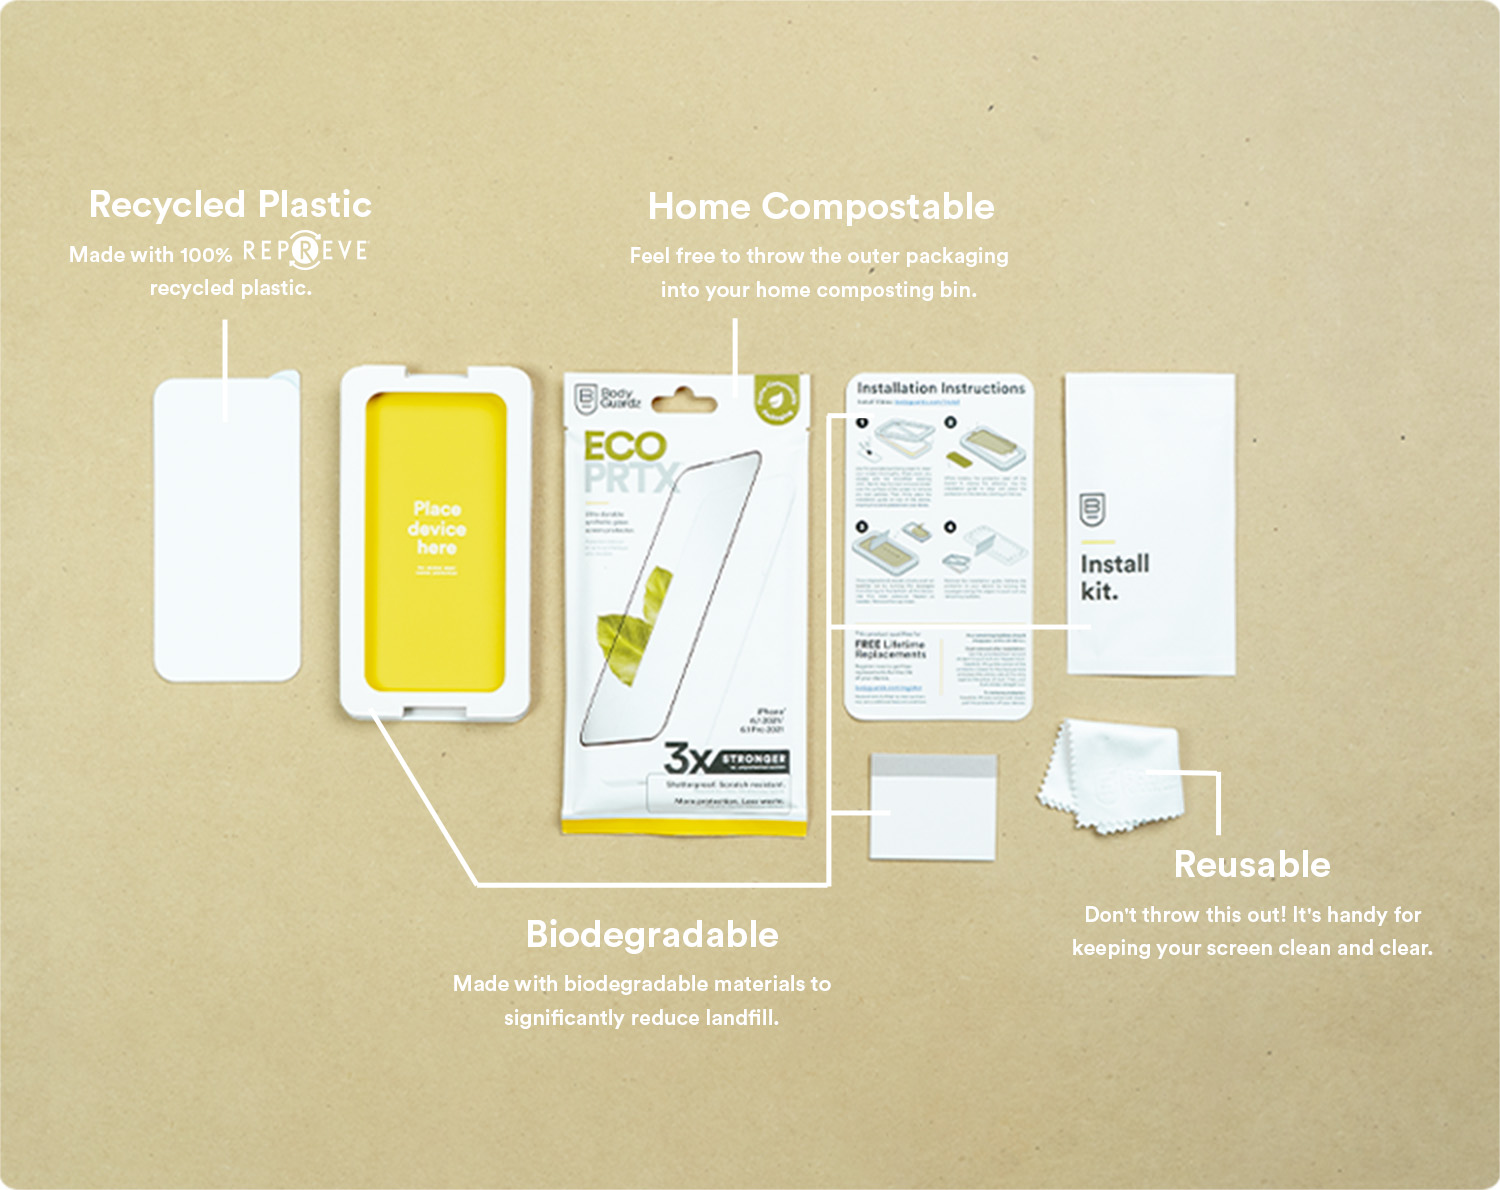 Sustainable packaging examples using recycled plastic and compostable cardboard.